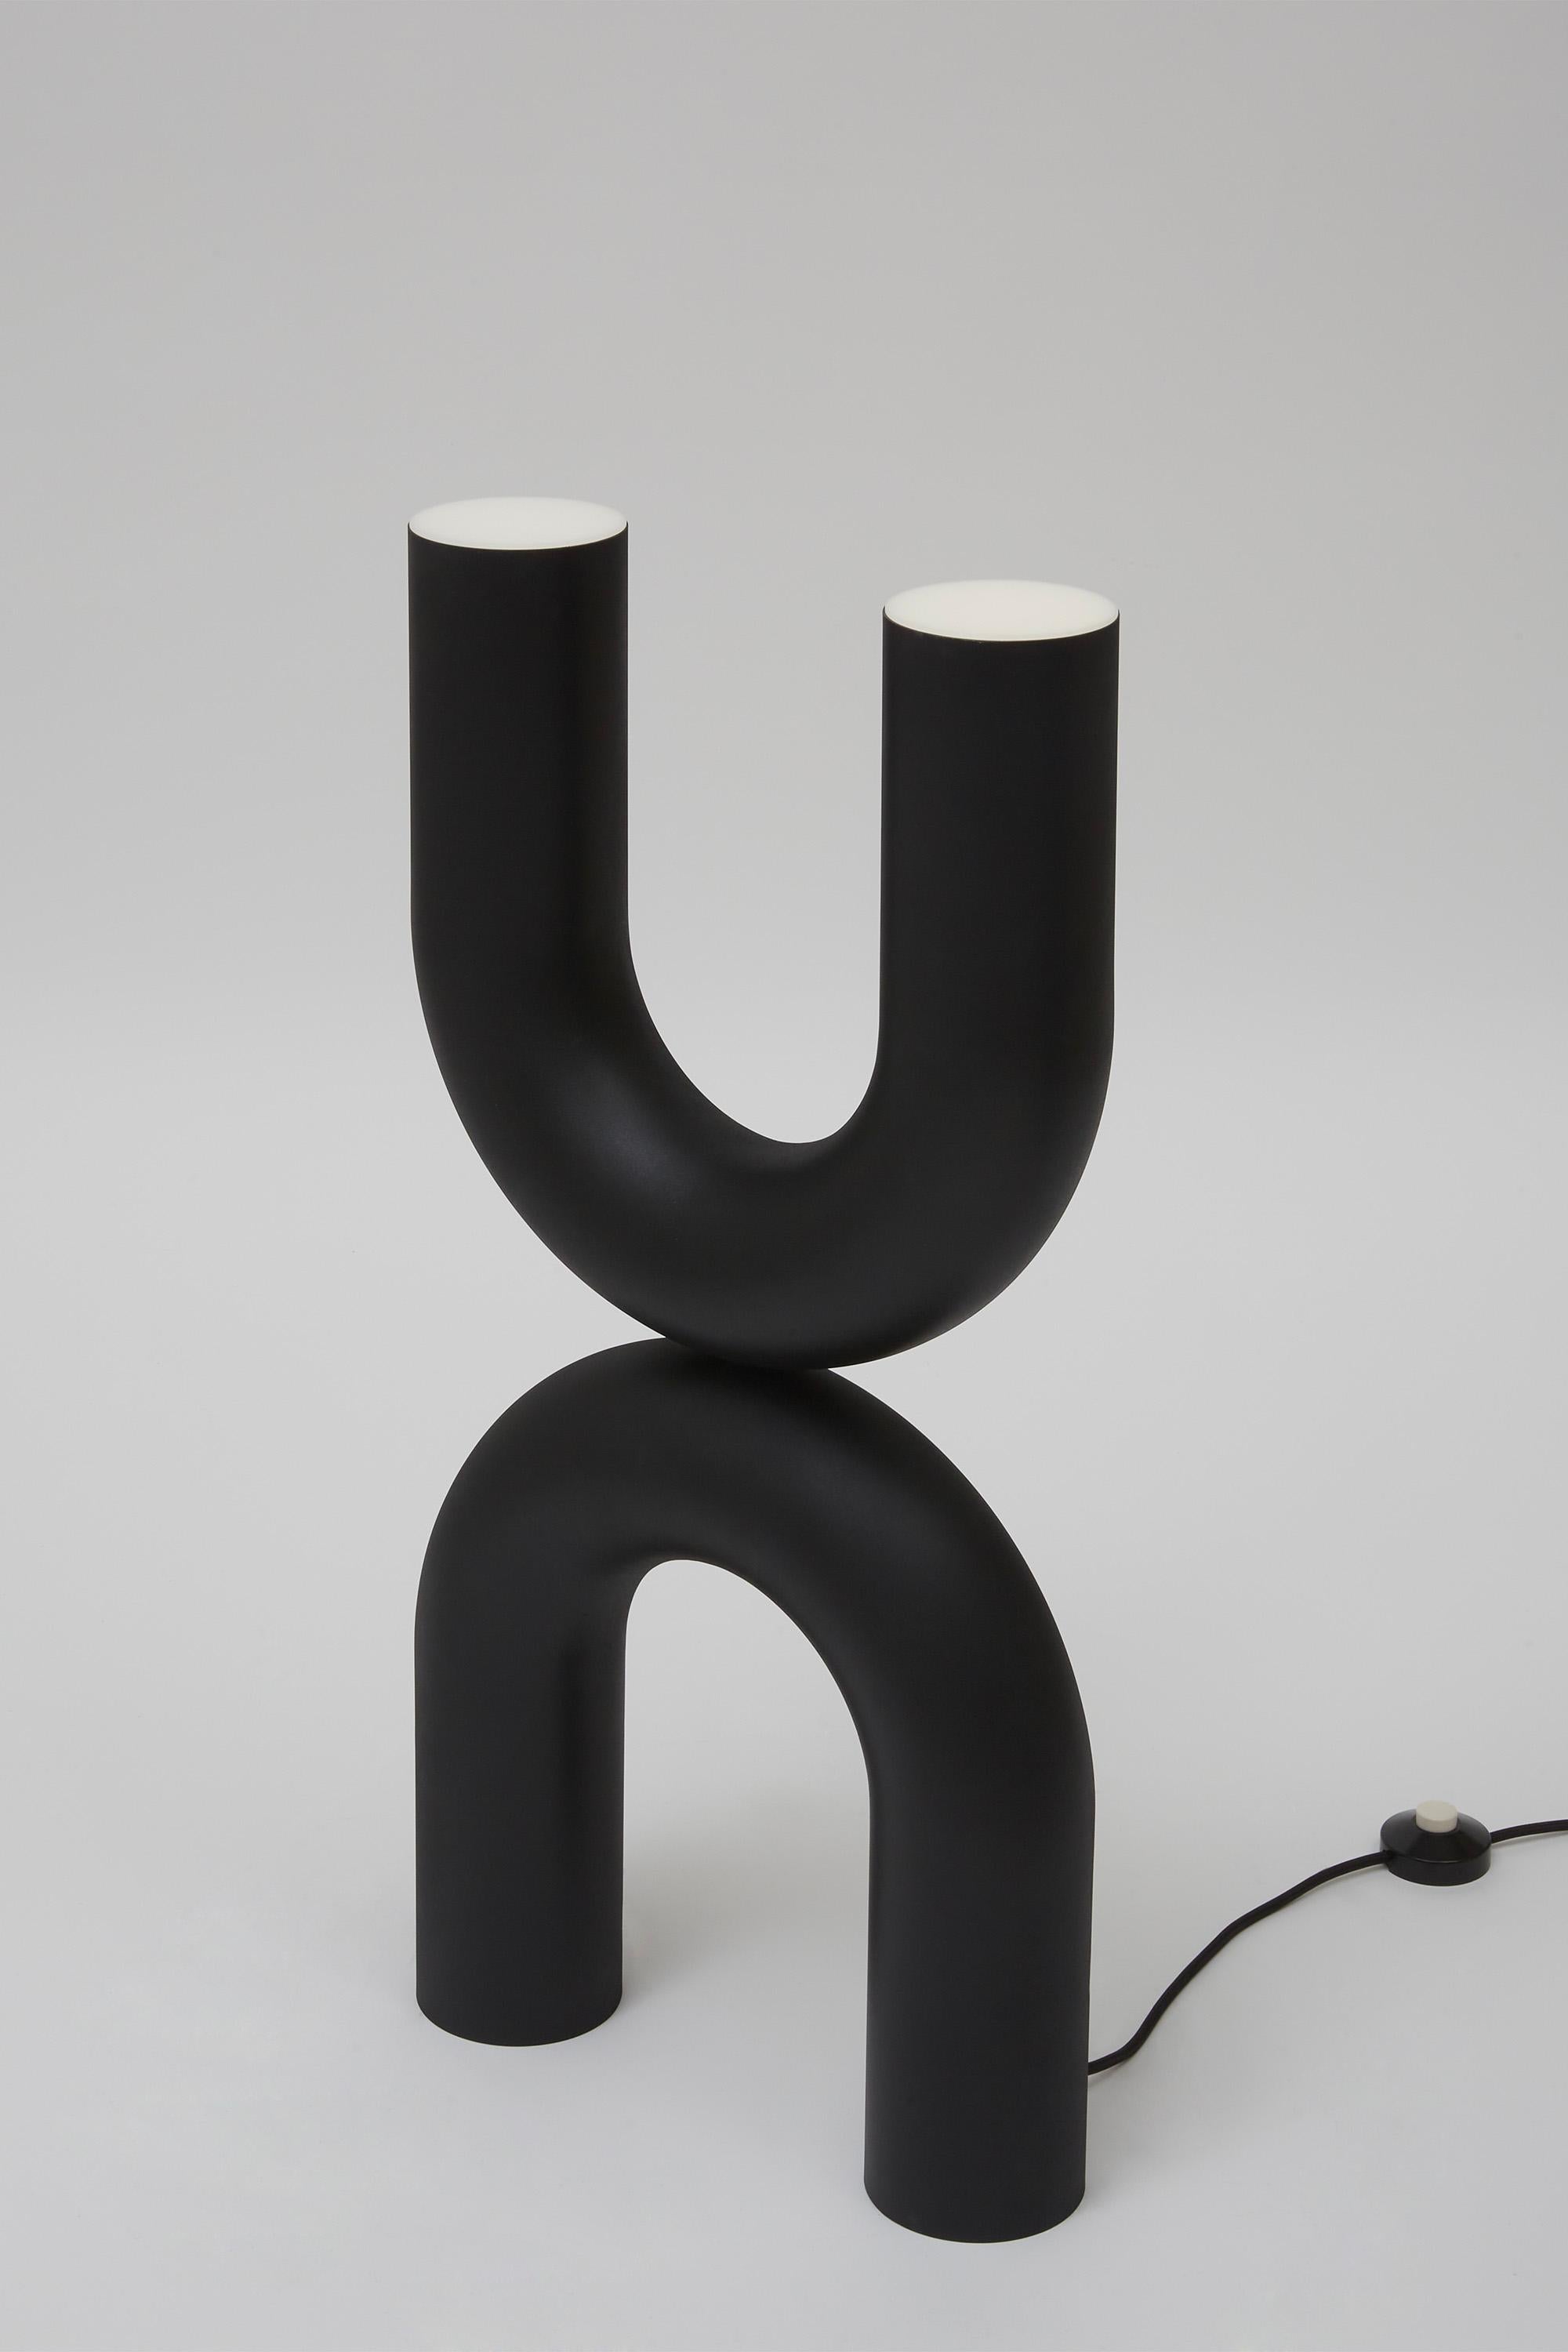 A totemic design obtained by piling two Us facing opposite directions, this stunning floor lamp will provide illumination while adding an exquisite artistic twist to corners of contemporary homes. The steel frame features a homogeneous black finish